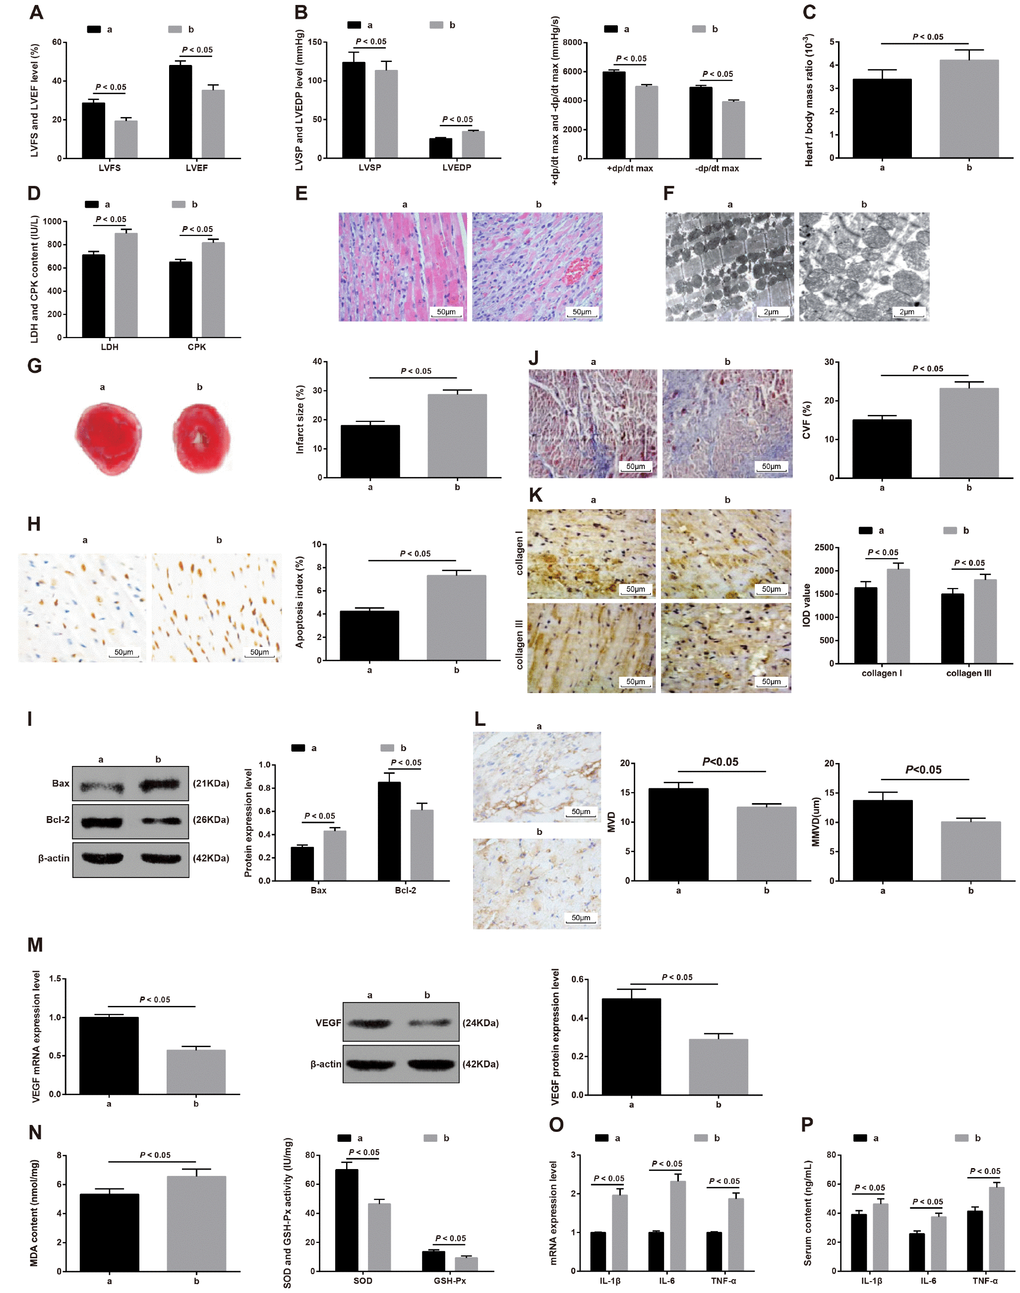 The effect of downregulation of miR-218 and MITF on the cardiac function and fibrosis in MI rats. a refers to the MI + miR-218 inhibitors + siRNA-NC group and b refers to the MI + miR-218 inhibitors + siRNA-MITF group. (A) the LVEF and LVFS of rats detected by ultrasonic cardiogram, n = 12; (B) the LVSP, LVEDP, +dp/dt max and -dp/dt max of rats detected by hemodynamic monitoring, n = 12; (C) the ratio of heart to body weight, n = 6; (D) serum levels of LDH and CPK examined by the biochemical analyzer, n = 6; (E) HE staining showing pathological changes of cardiac tissues (× 200), n = 3; (F) ultrastructure of cardiomyocytes observed by transmission electron microscope (× 5000), n = 3; (G) TTC staining showing the infarct size of rats, n = 3; (H) TUNEL staining showing the apoptotic index of cardiomyocytes (× 400), n = 3; (I) Western blot assay showing protein levels of apoptosis-related factors Bax and Bcl-2 in cardiac tissues, n = 3; (J) Masson staining showing the cardiac fibrosis of rats (× 200); (K) immunohistochemical staining showing the expression of type I collagen and type III collagen (× 200); (L) MVD and MMVD of cardiac tissues; (M) the mRNA and protein expression of angiogenesis-related factor VEGF detected by RT-qPCR and western blot assay; (N) the levels of MDA and the activity of GSH-Px and SOD determined by the spectrocolorimetric method, n = 3; (O) the mRNA expression of IL-1β, IL-6 and TNF-α detected by RT-qPCR, n = 3; (P) the serum levels of IL-1β, IL-6 and TNF-α detected by ELISA, n = 6; Data were analyzed by t test. MI, myocardial infarction; LVEF, left ventricular ejection fraction; LVFS, left ventricular fraction shortening; LVSP, left ventricular systolic pressure; LVEDP, left ventricular end diastolic pressure; RT-qPCR, reverse transcription quantitative polymerase chain reaction; MITF, microphthalmia-associated transcription factor; miR-218, microRNA-218; LDH, lactate dehydrogenase; CPK, creatine phosphokinase; MVD, microvascular density; MMVD, mean microvessels diameter; VEGF, vascular endothelial growth factor; ELISA, enzyme-linked immunosorbent assay; IL-1β, interleukin-1β; IL-6, interleukin-6; TNF-α, tumor necrosis factor-α; MDA, malondialdehyde; GSH-Px, glutathione peroxidase; SOD, superoxide dismutase.